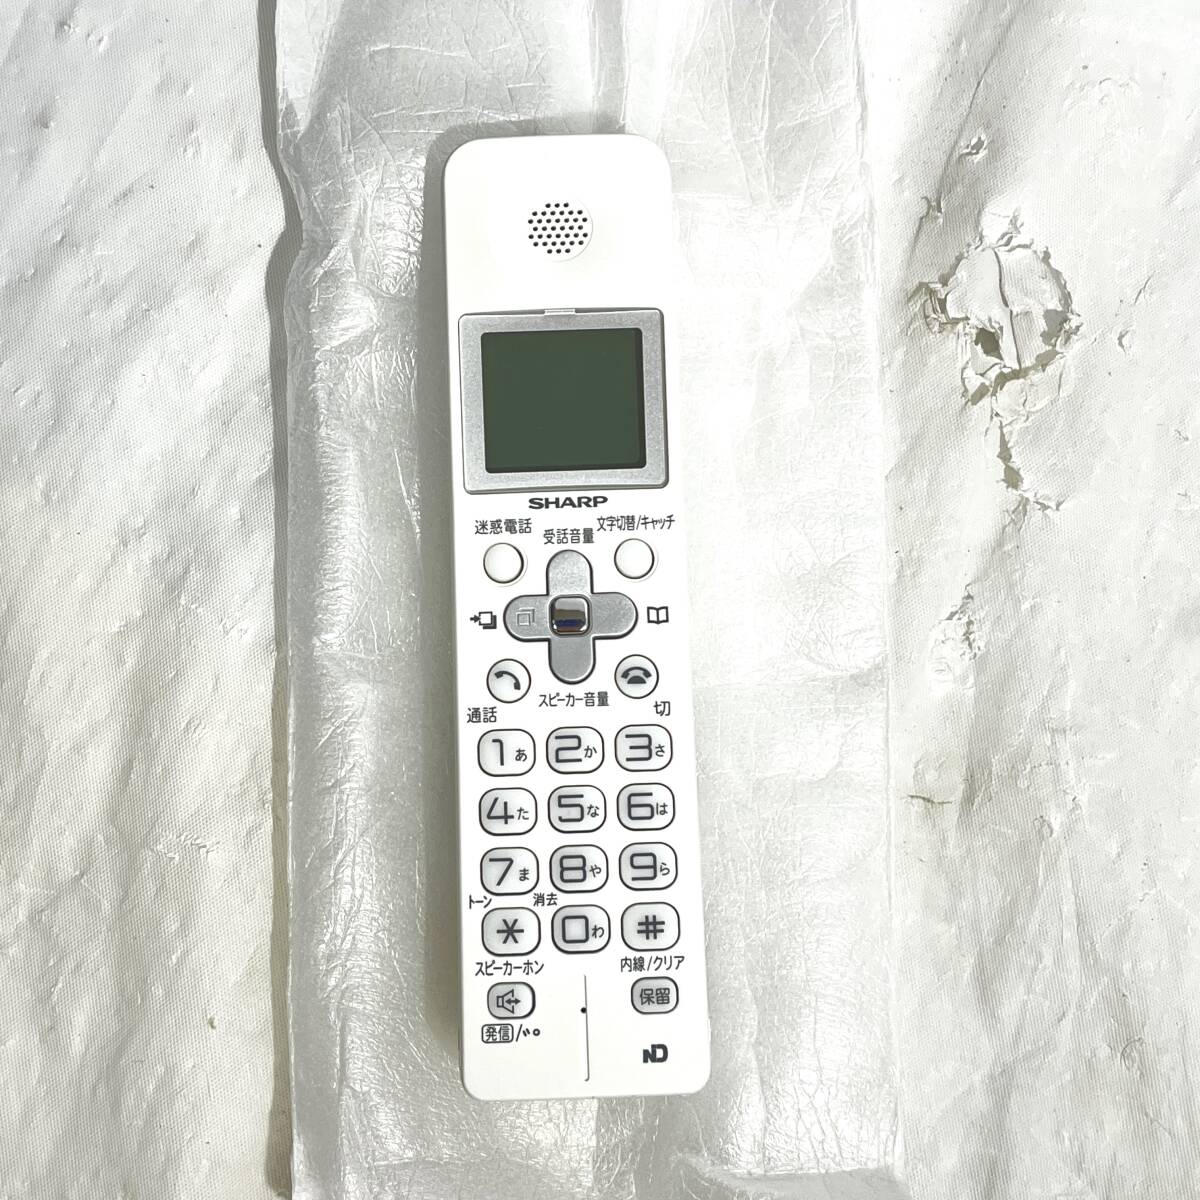 (. tree )[ unused ]SHARP/ sharp cordless telephone machine JD-KS25 cordless handset extension for white battery rechargeable battery A-002 charger (o)